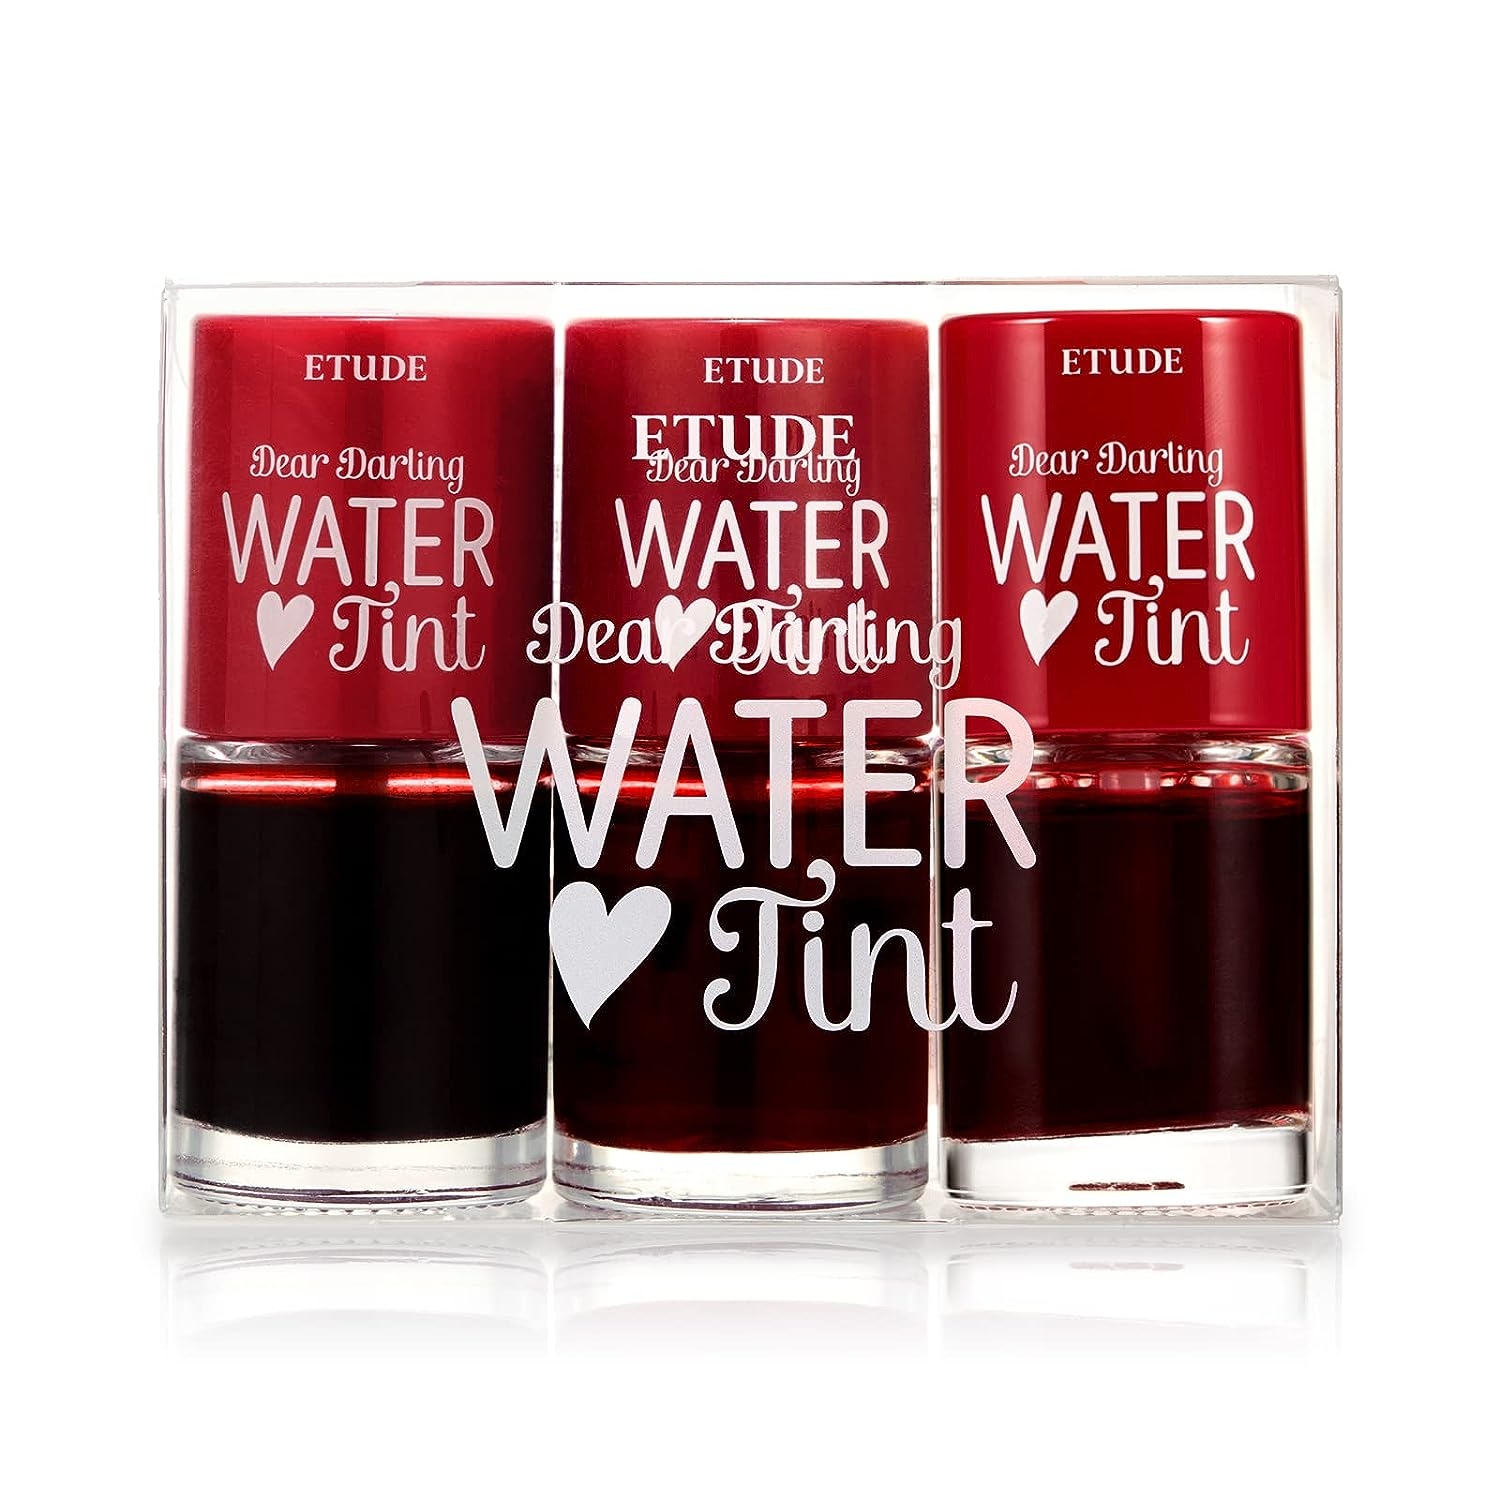 ETUDE Dear Darling Water Tint Cherry Ade (21AD) | Vivid Color Lip Stain with Moisturizing Weightless & Non-sticky Finish Lip